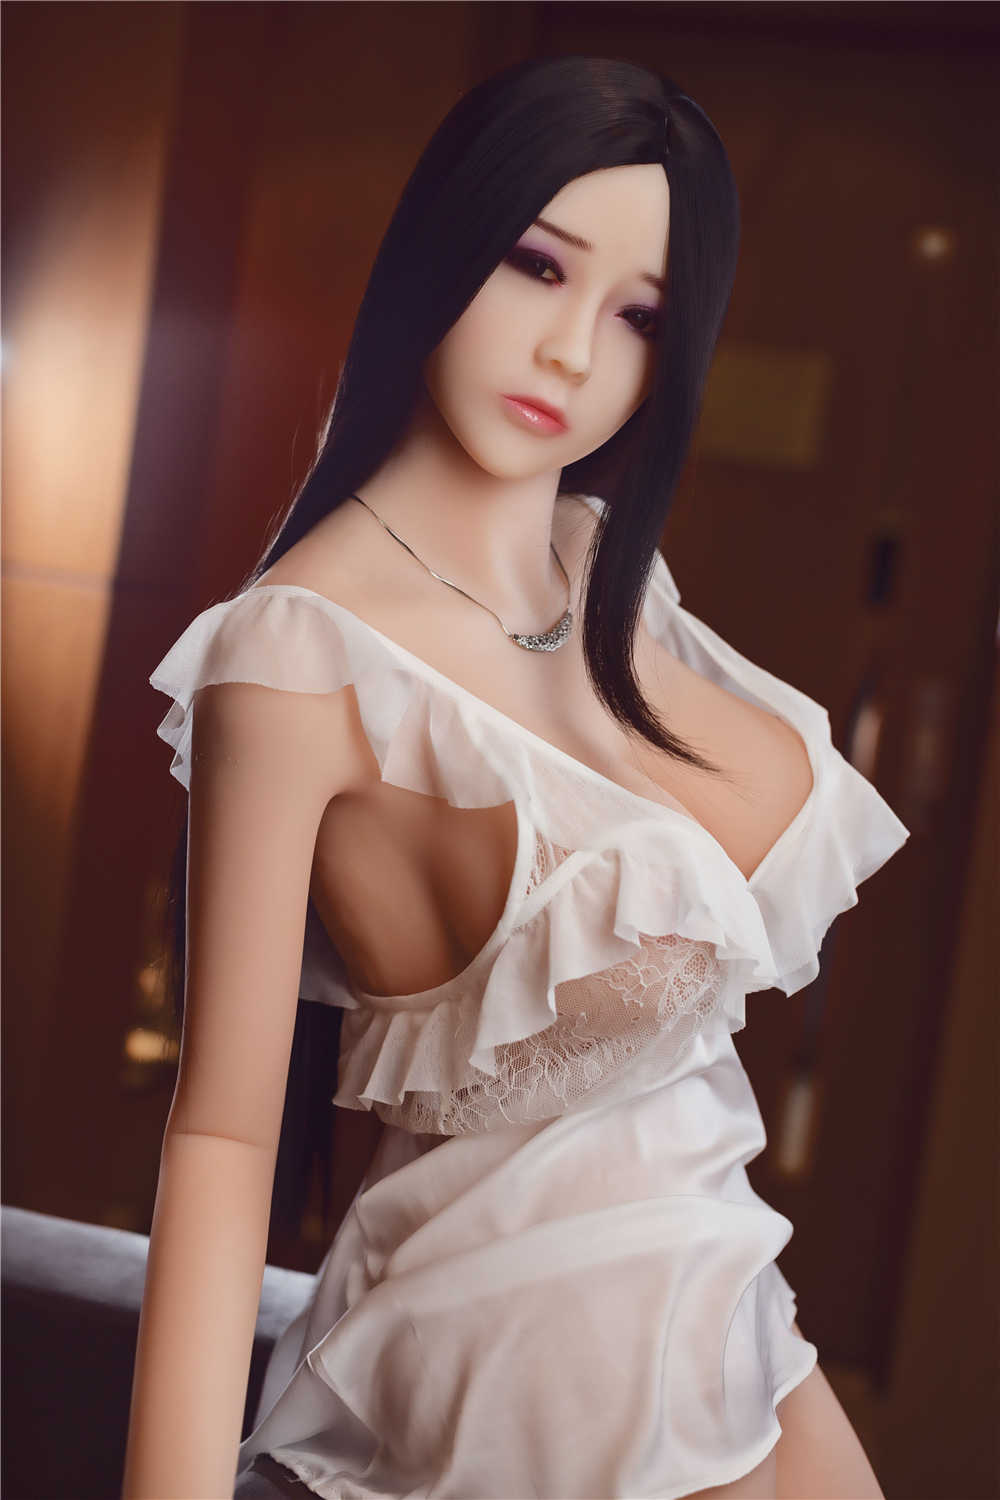 <br />
<b>Warning</b>:  Illegal string offset 'title' in <b>/www/wwwroot/jinshenadultdoll.com/wp-content/themes/goodao/archive-tags.php</b> on line <b>1356</b><br />
h